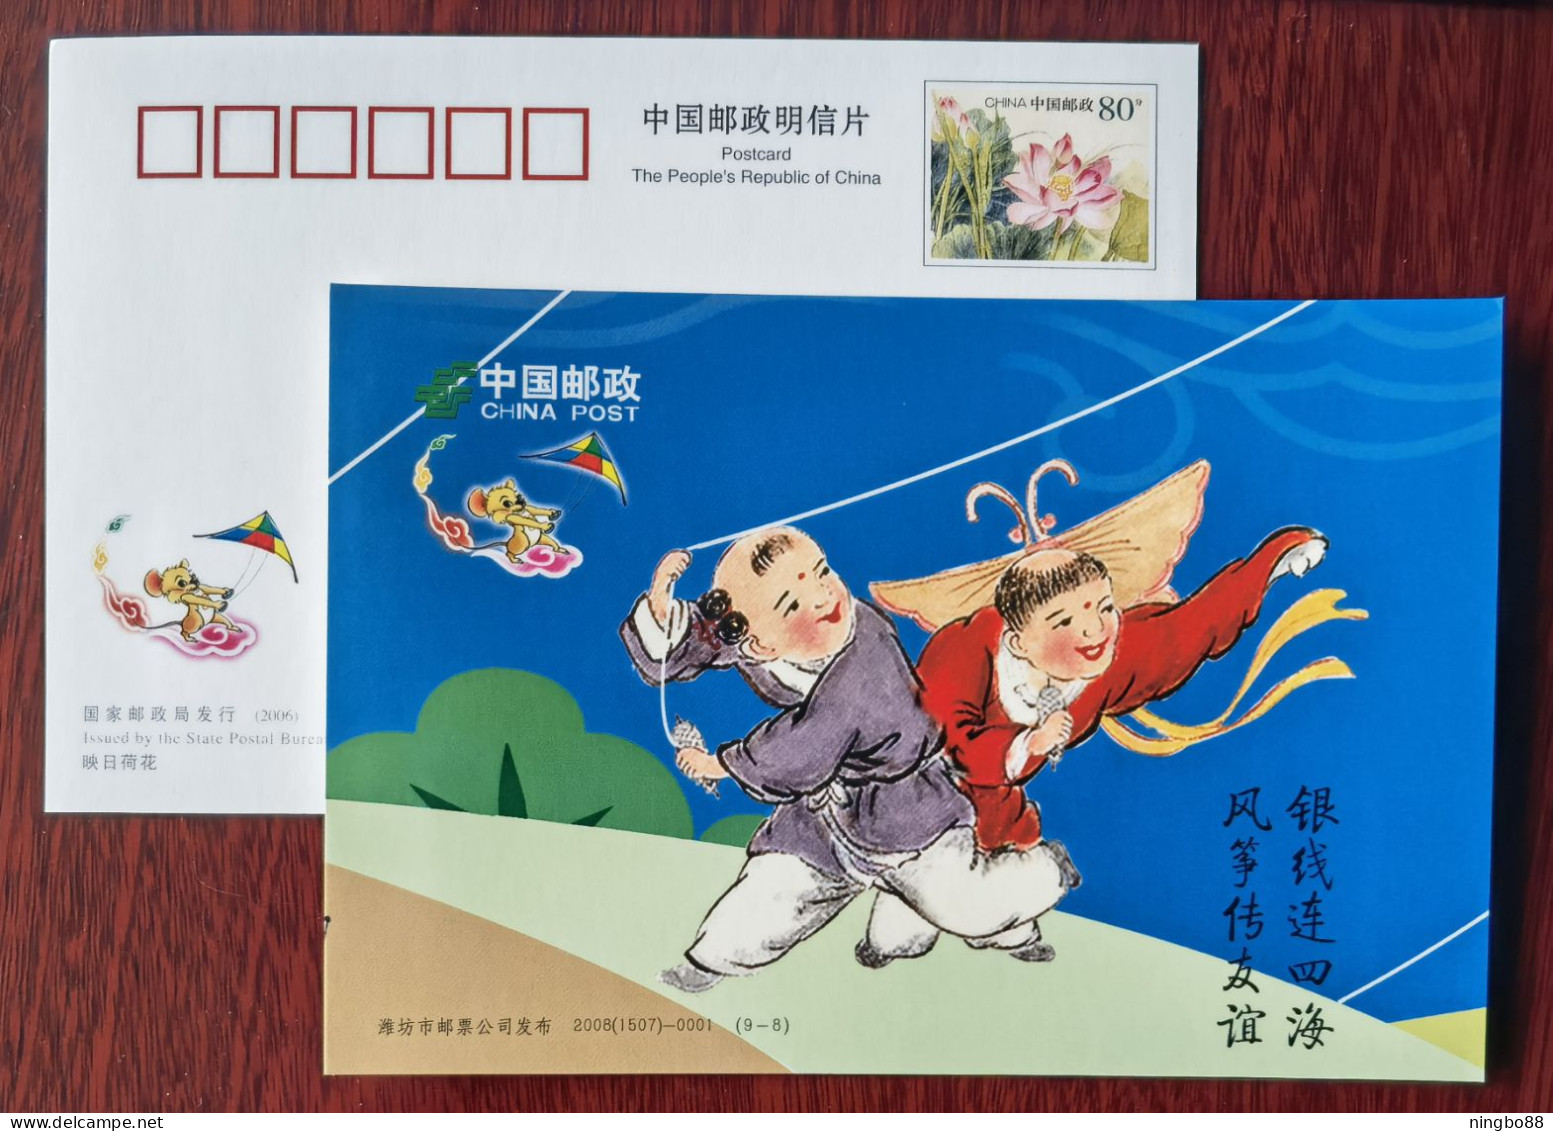 Children Play A Kite In The Sky,China 2008 Weifang International Kite Festival Pre-stamped Card - Fairy Tales, Popular Stories & Legends